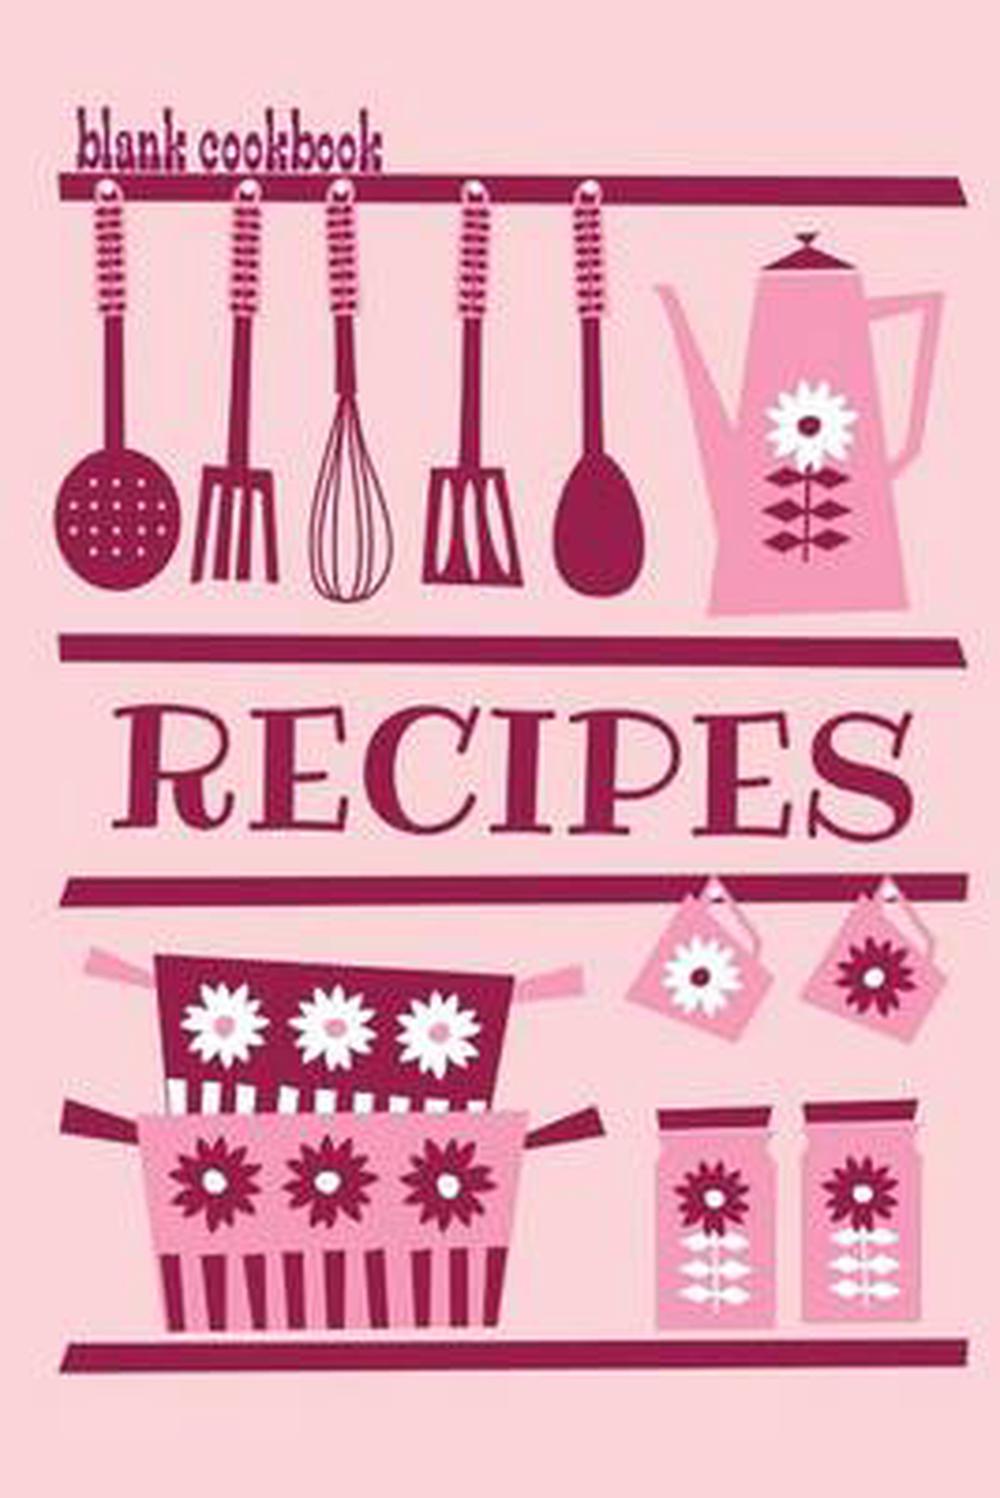 blank-cookbook-recipes-formatted-to-help-you-organize-your-recipes